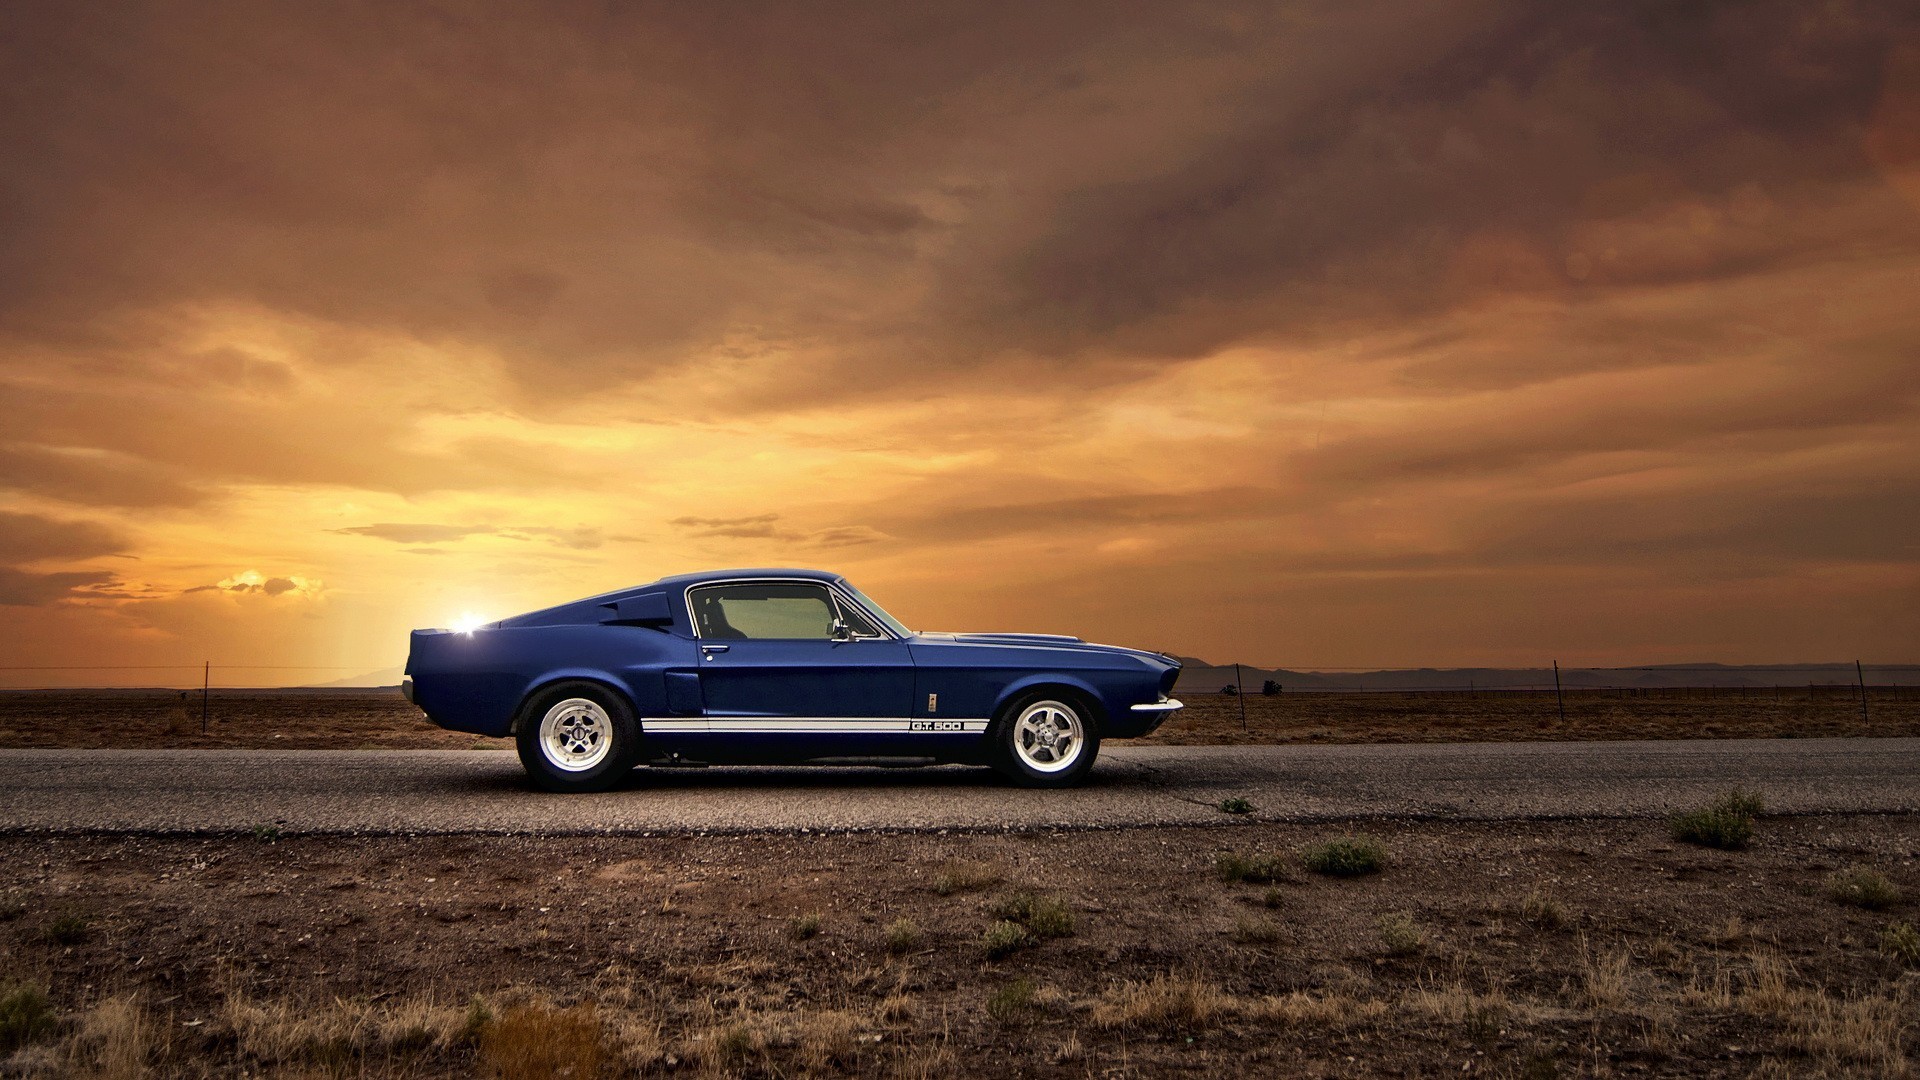 11 Best Muscle Car HD Wallpapers - Birthday Wishes, 3D Wallpaper ...